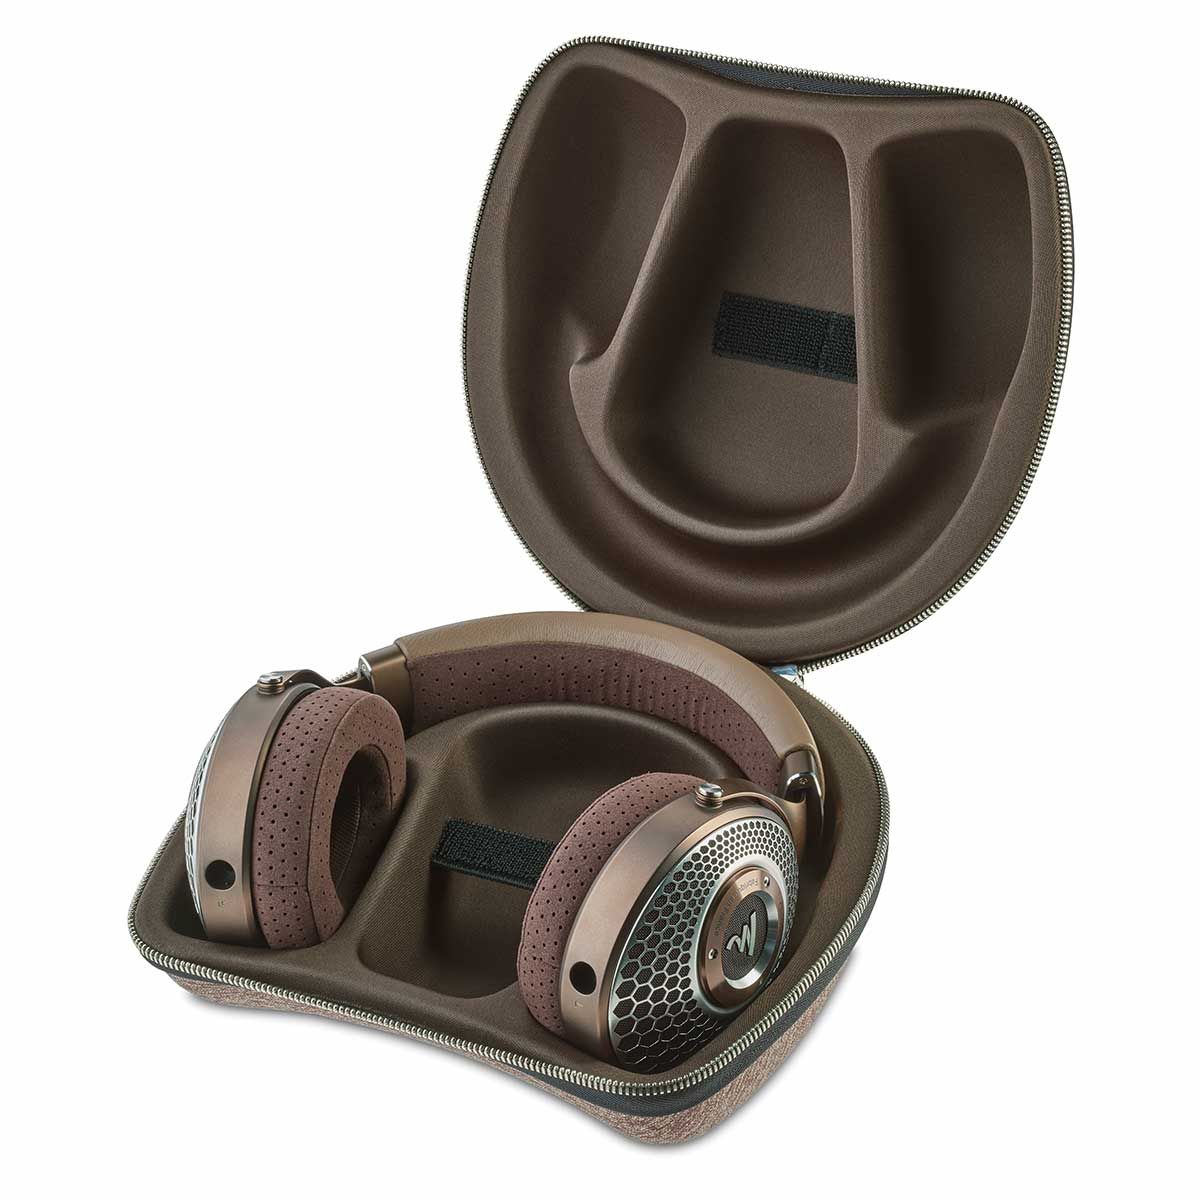 Focal Clear Mg Headphones, in carrying case